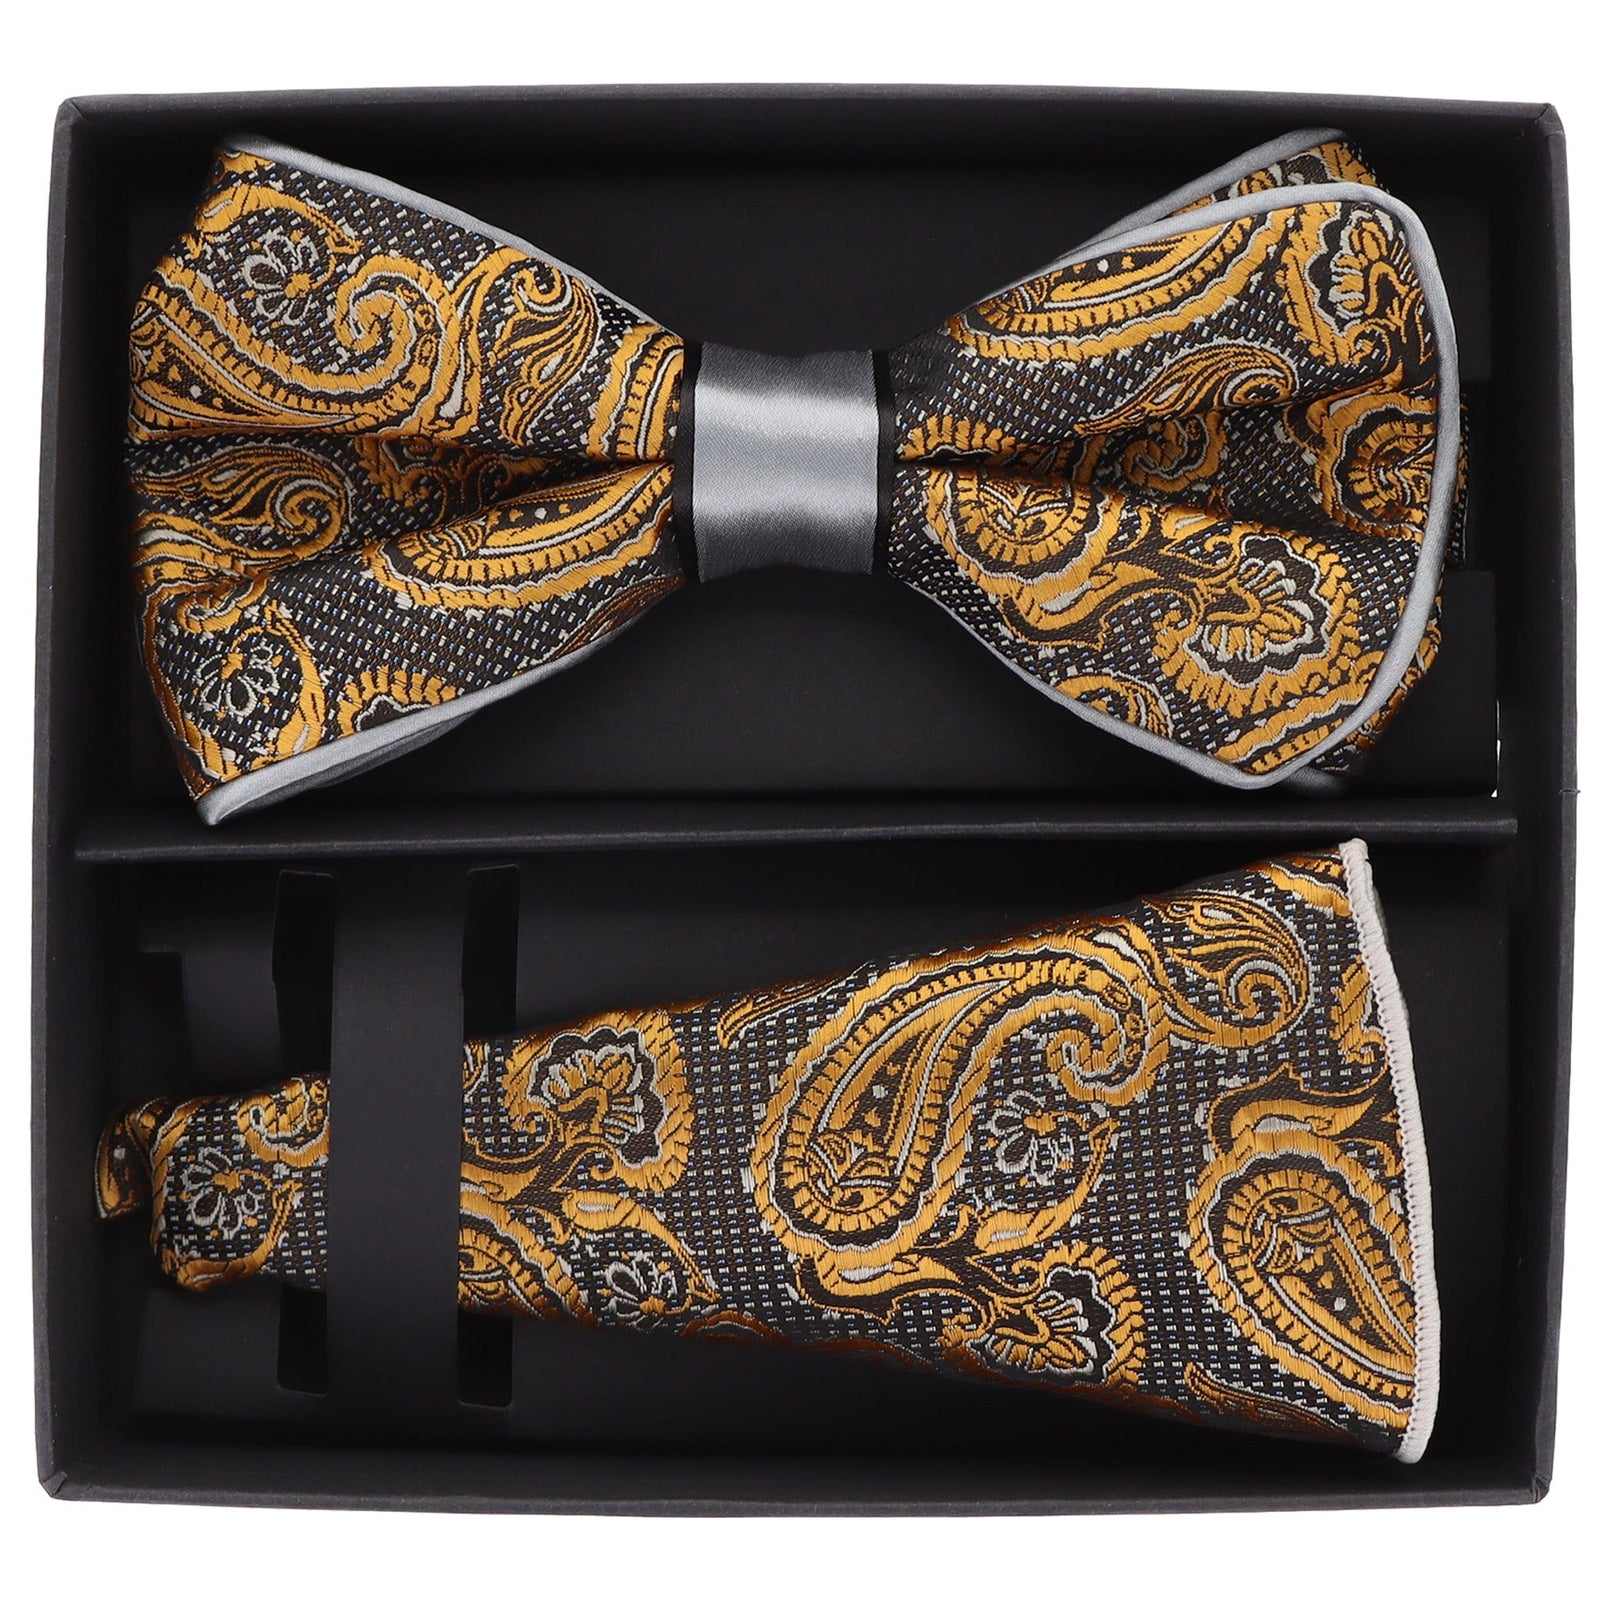 Vittorio Farina LIMITED EDITION Piping Bow Tie & Round Pocket Square by Classy Cufflinks - pbh-21010 - Classy Cufflinks